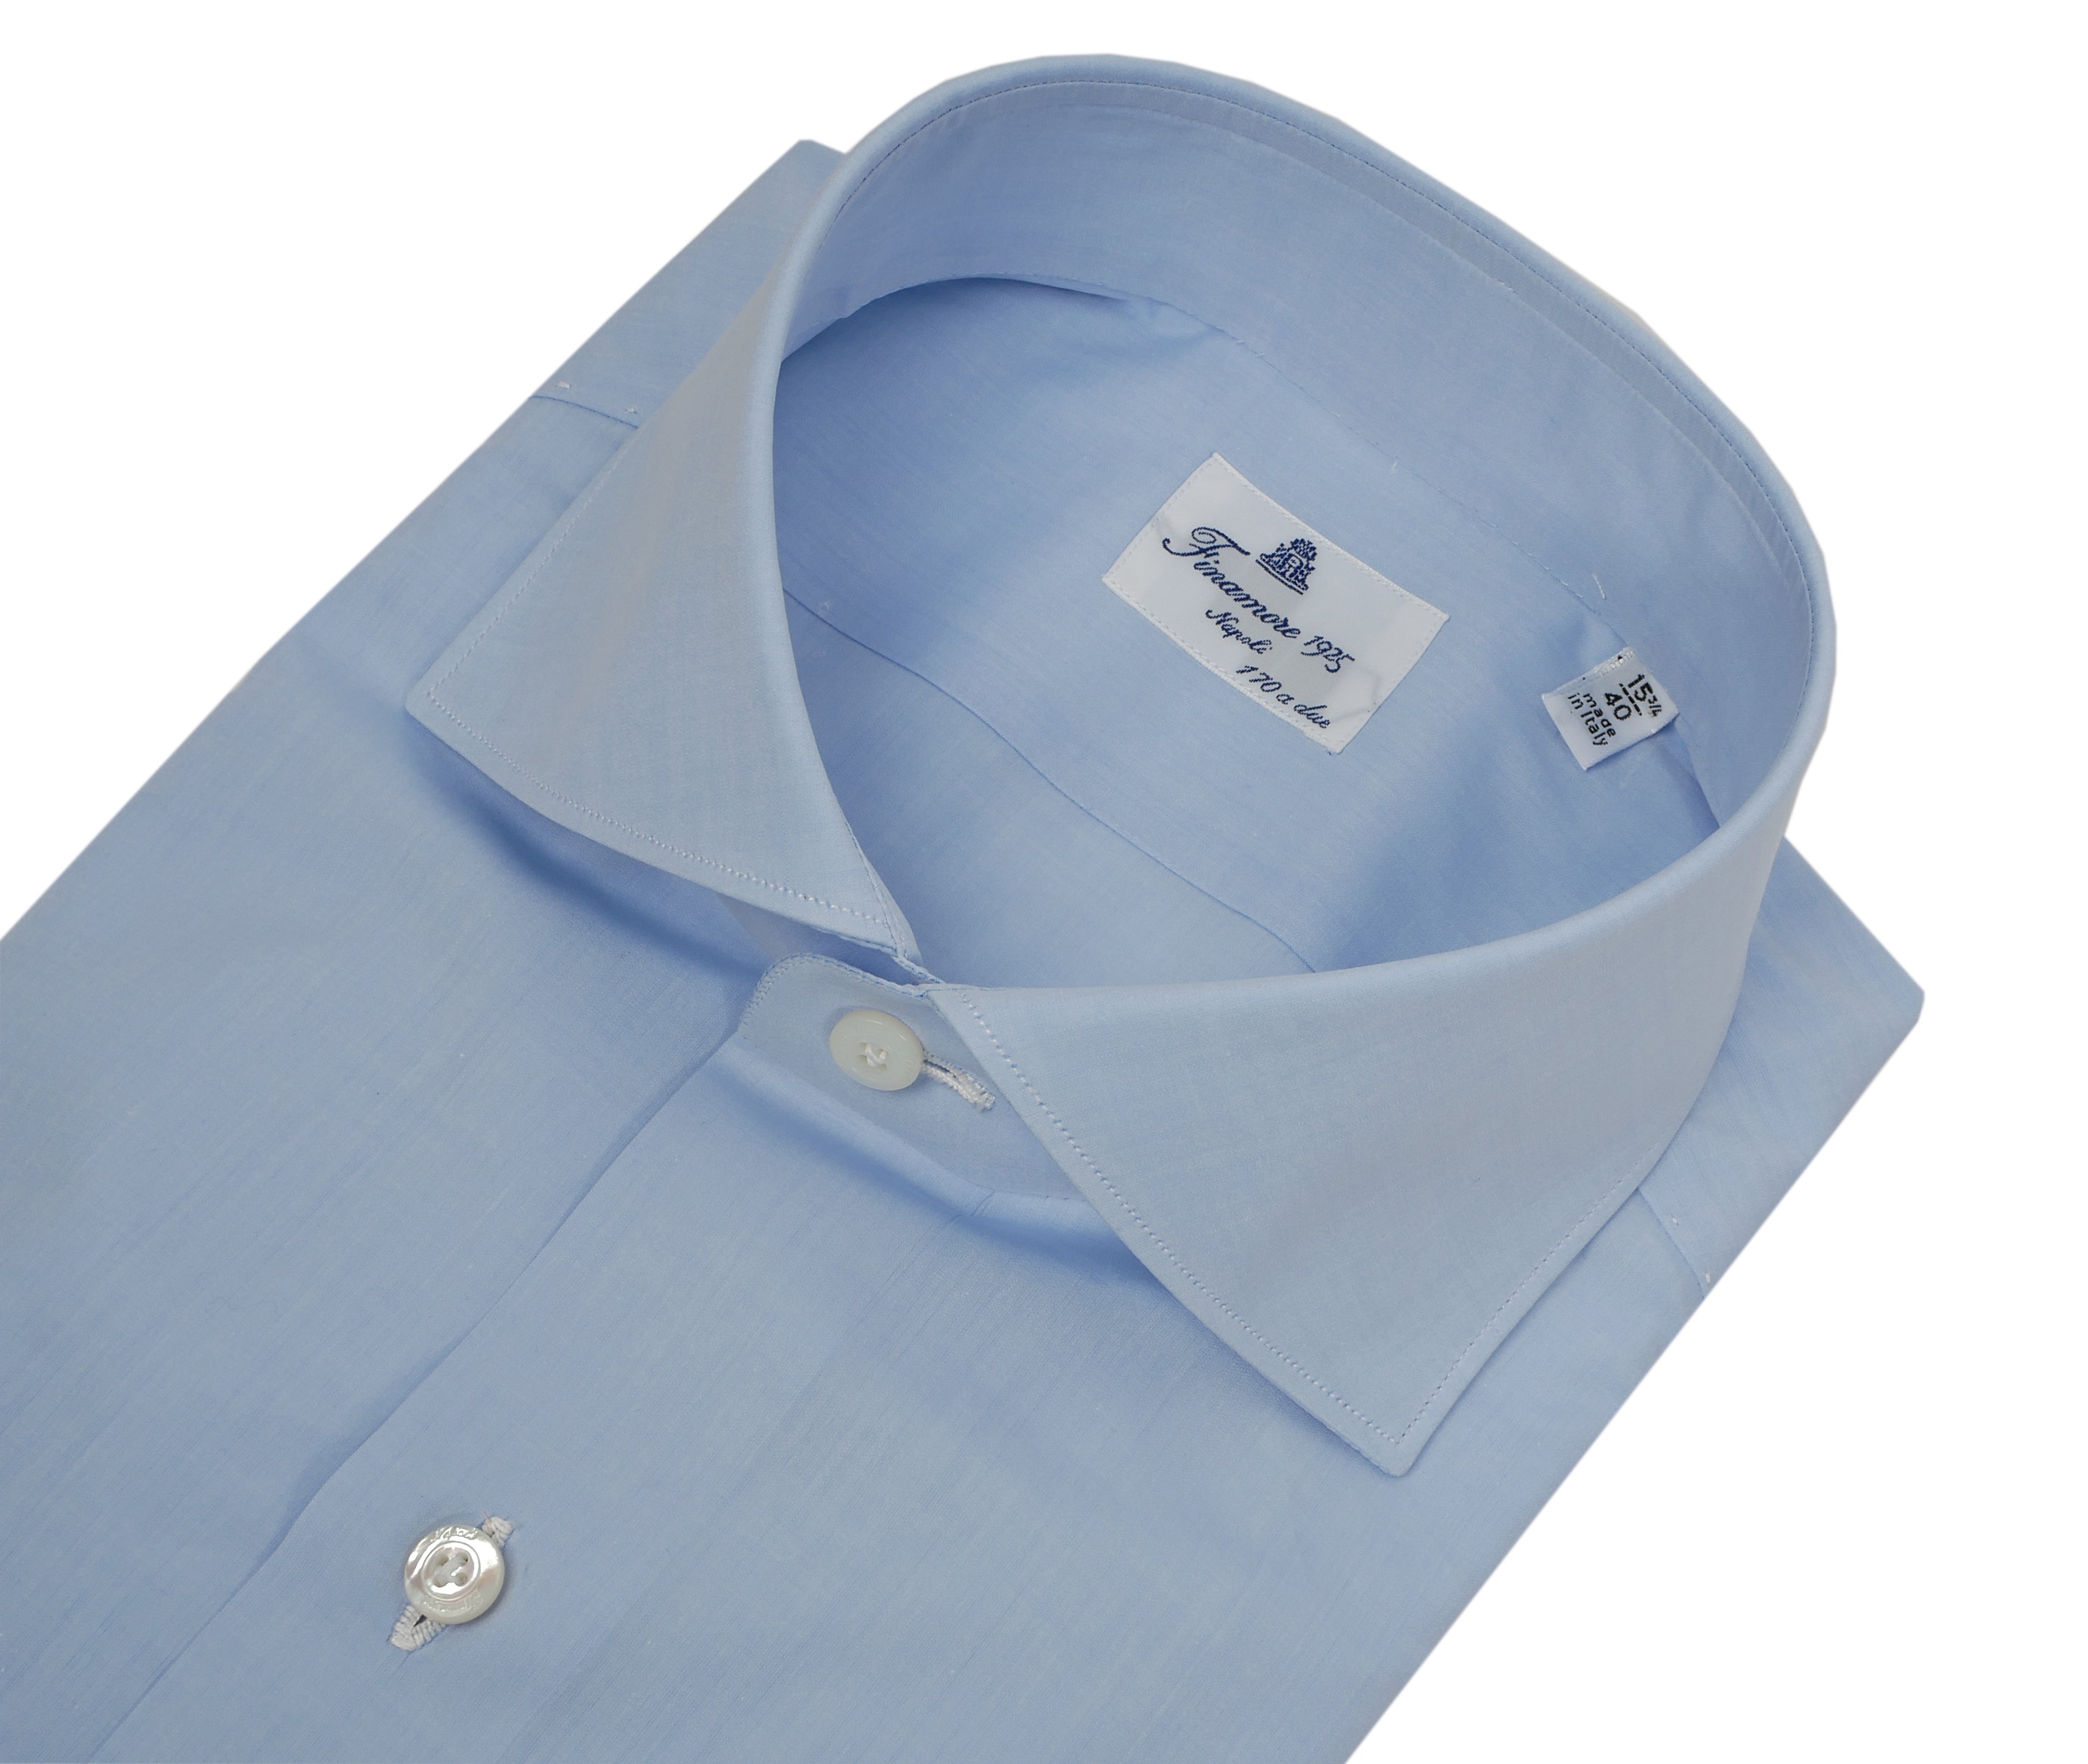 Tailored shirt in Giza 45 count 170 cotton, 2 Milan line